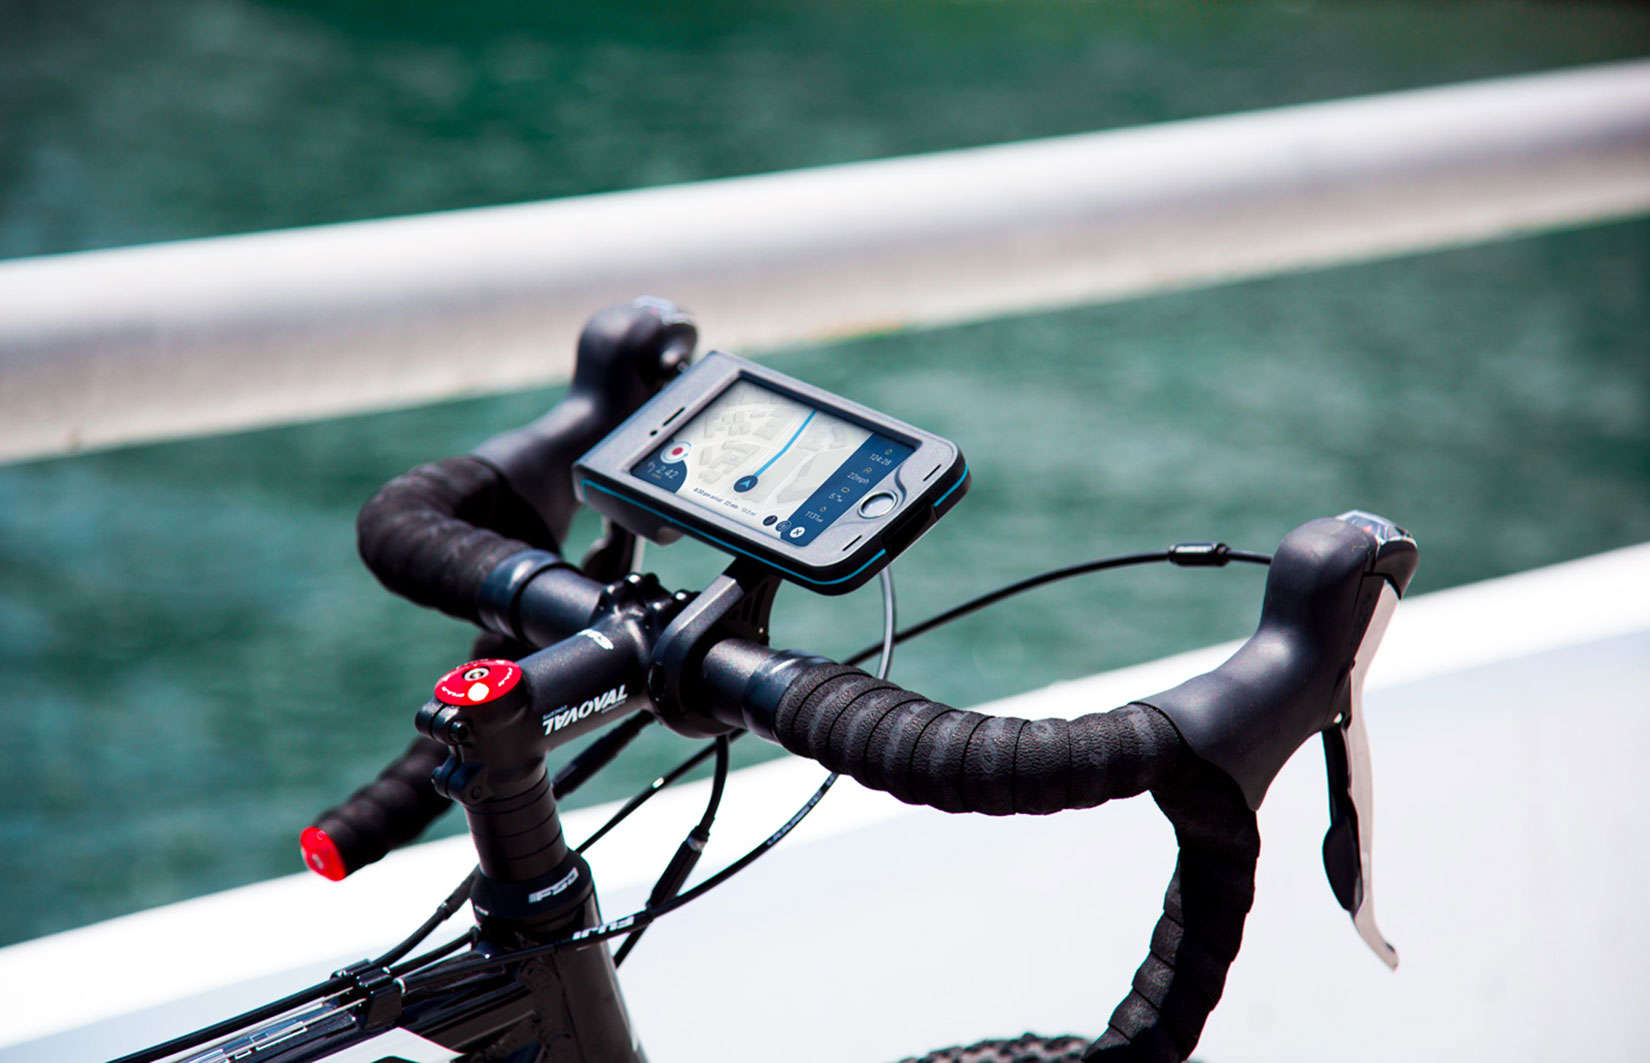 You just peddle while your iPhone with the Bycle mount and multi-tasking app does the rest.